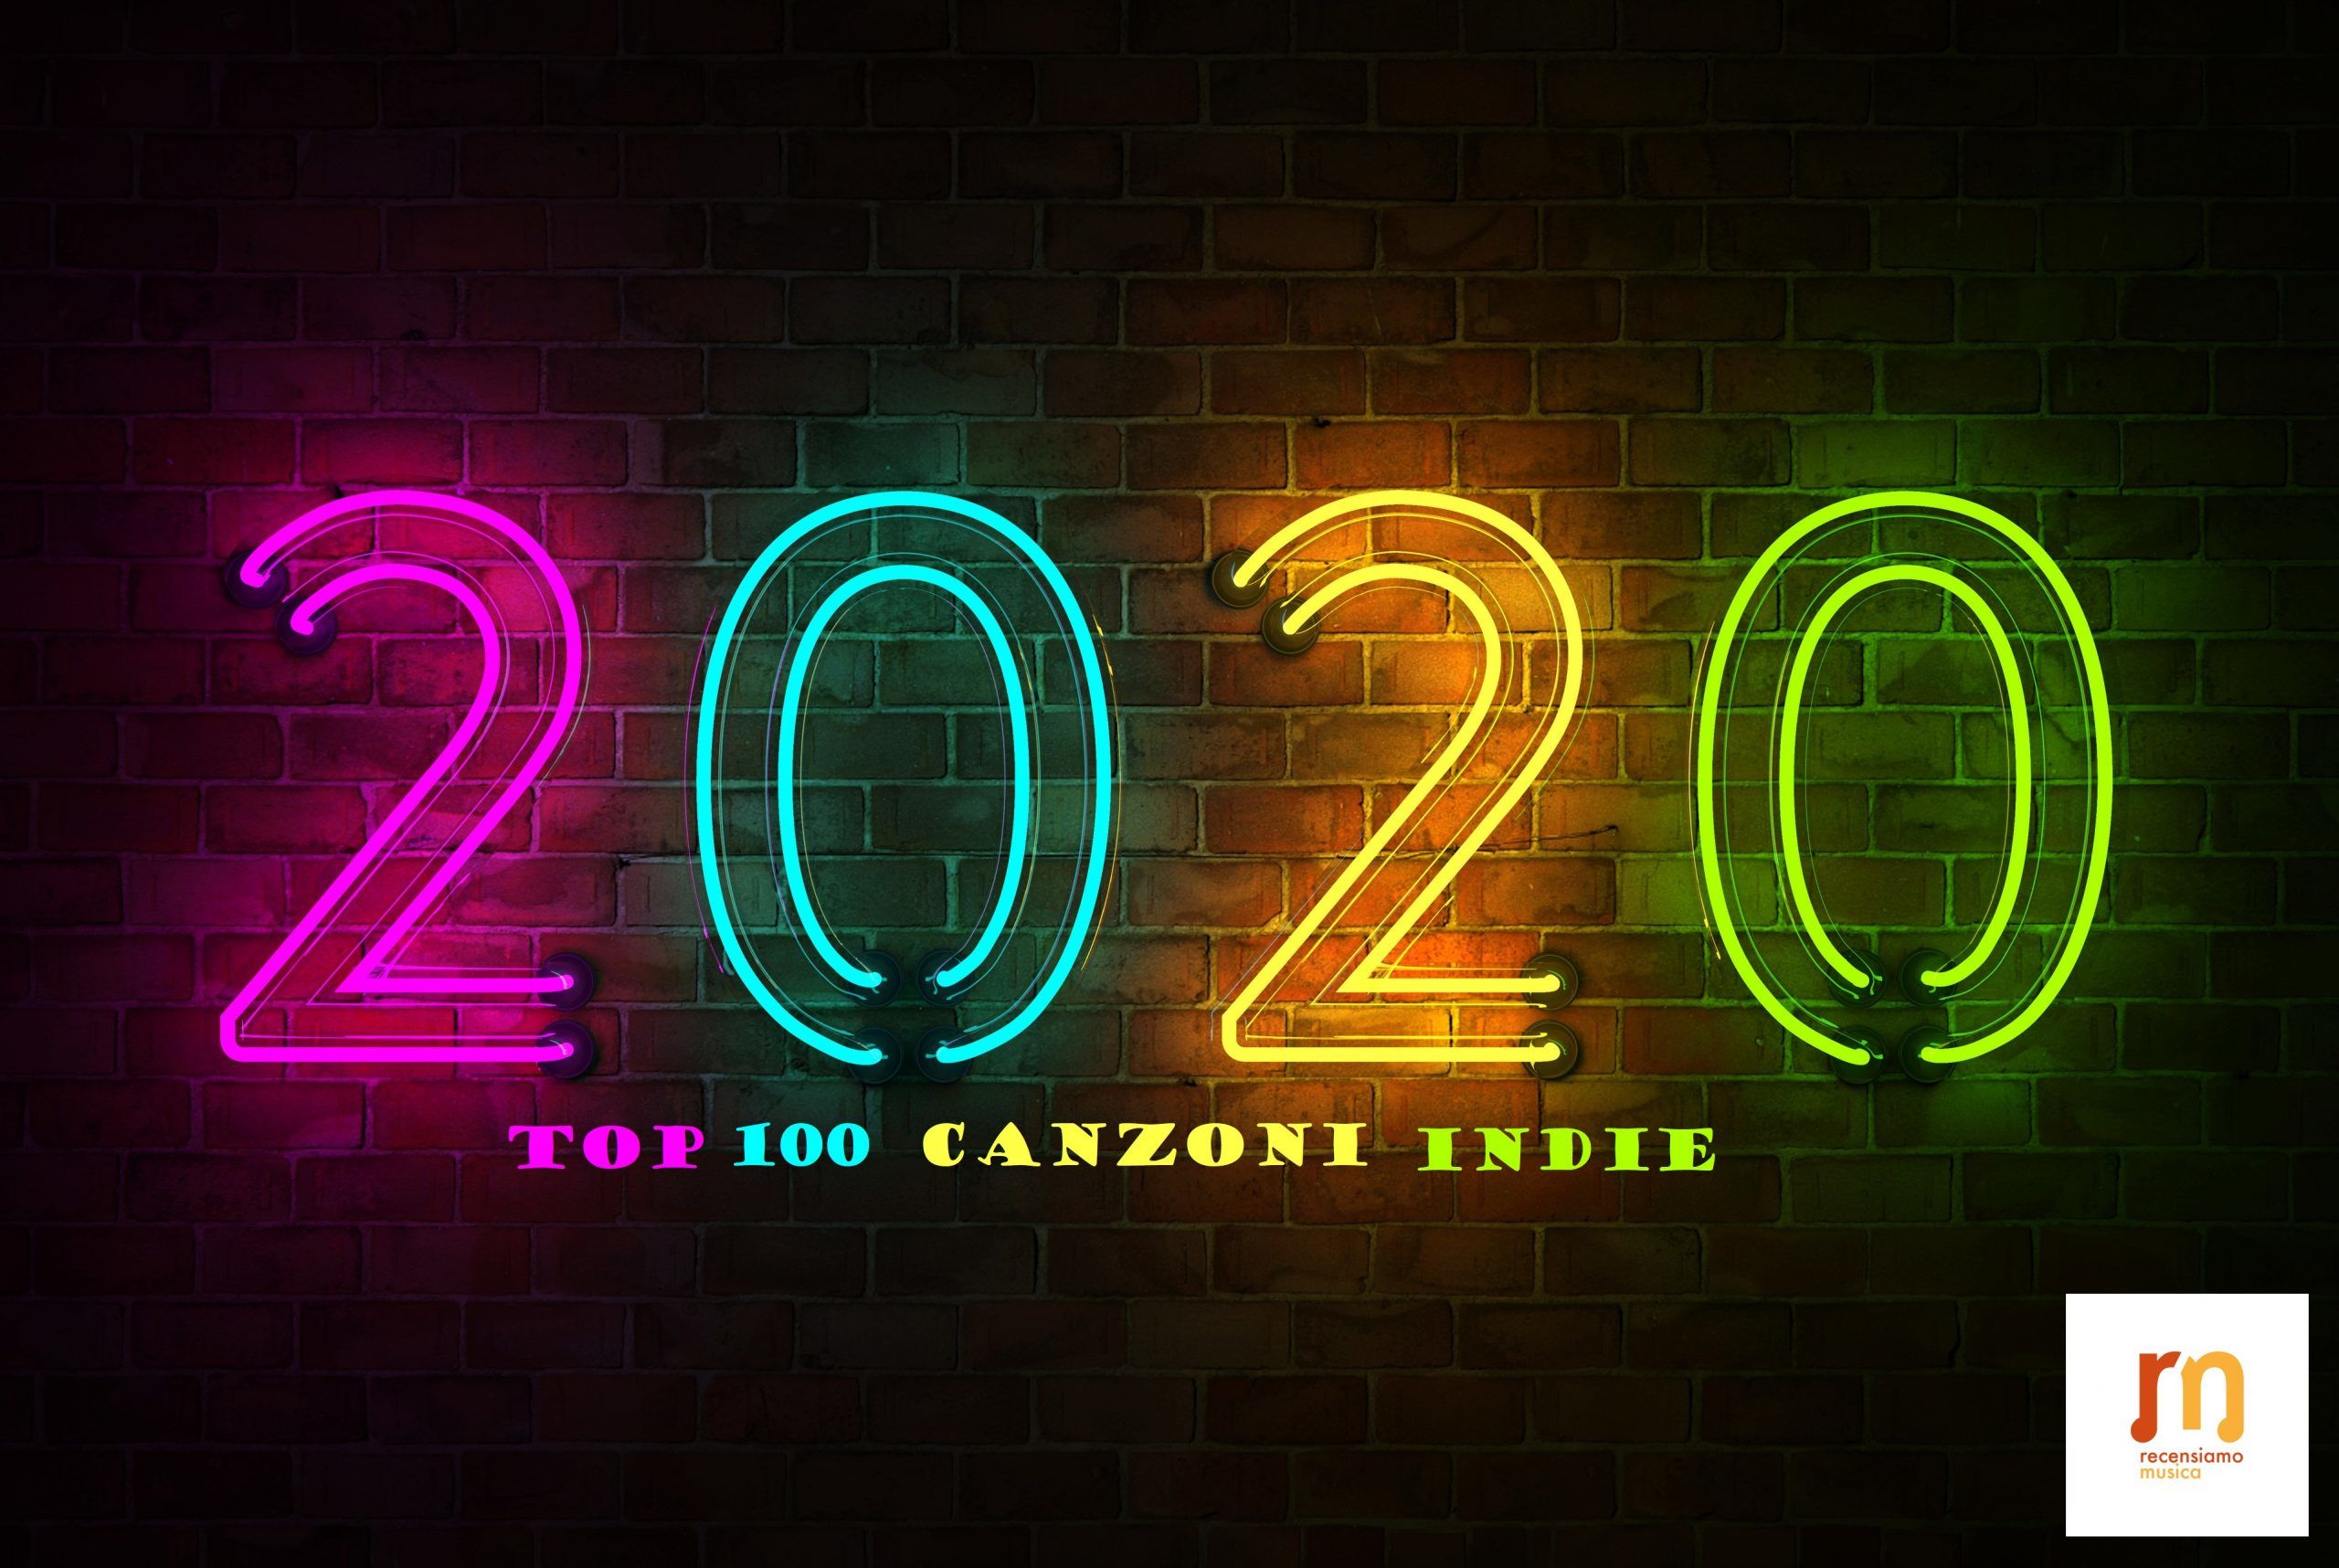 Top 100 canzoni indie 2020